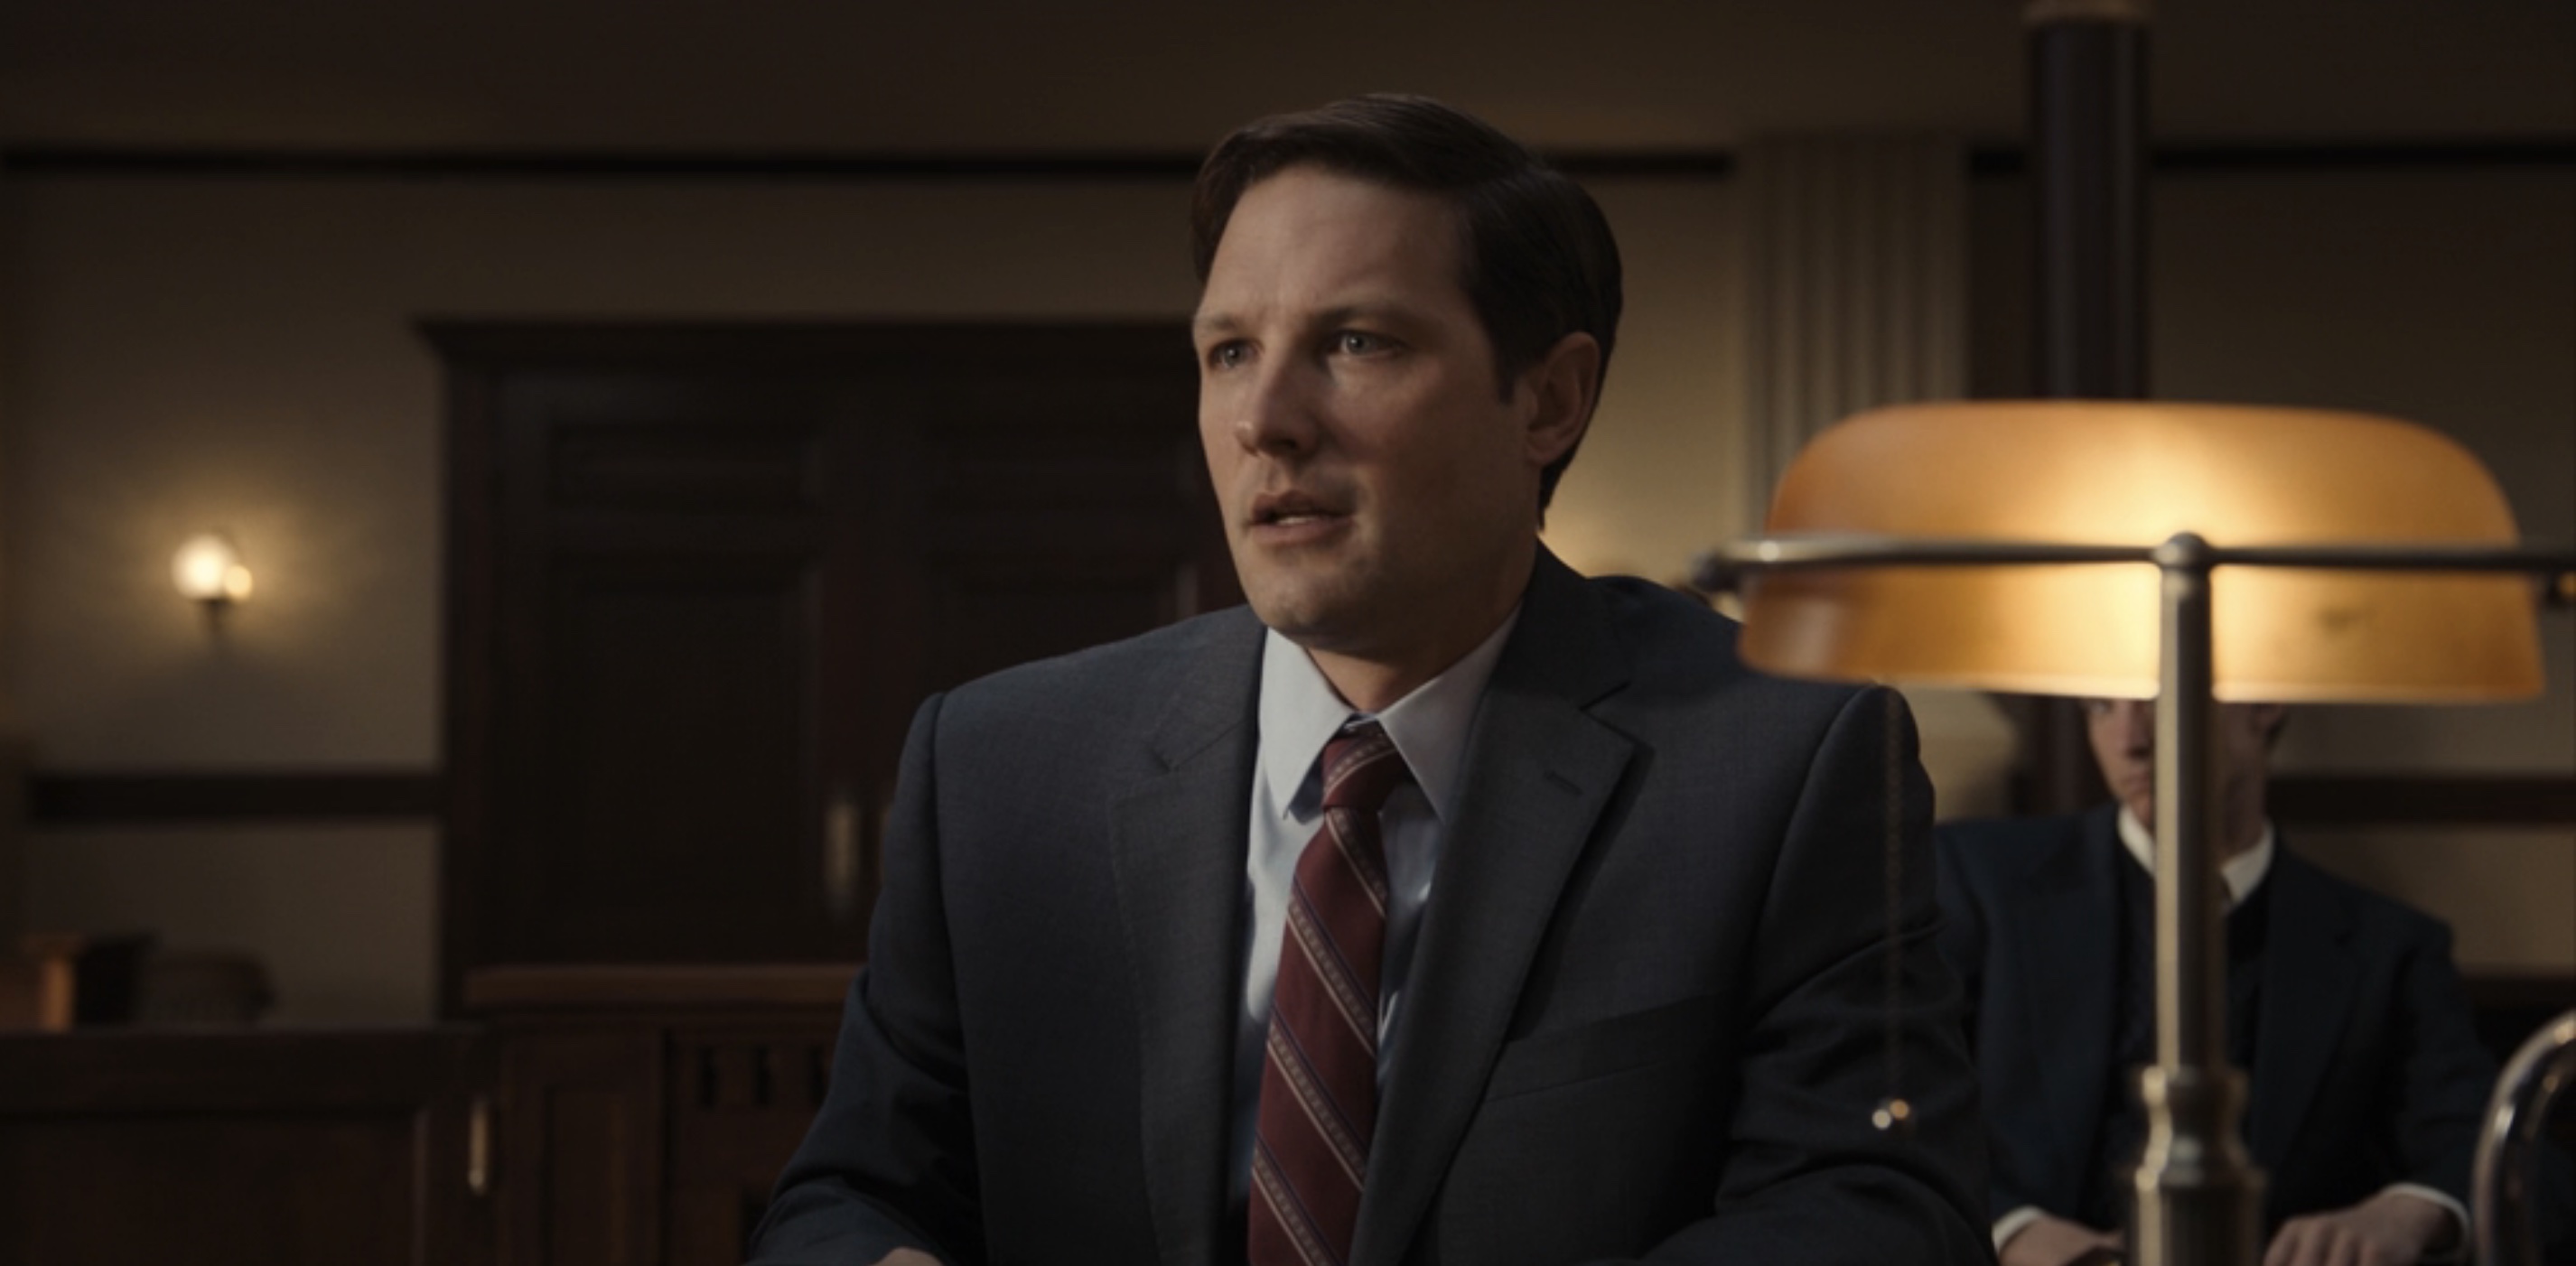 Waco: The Aftermath Cast on Showtime - Michael Cassidy as Bill Johnston